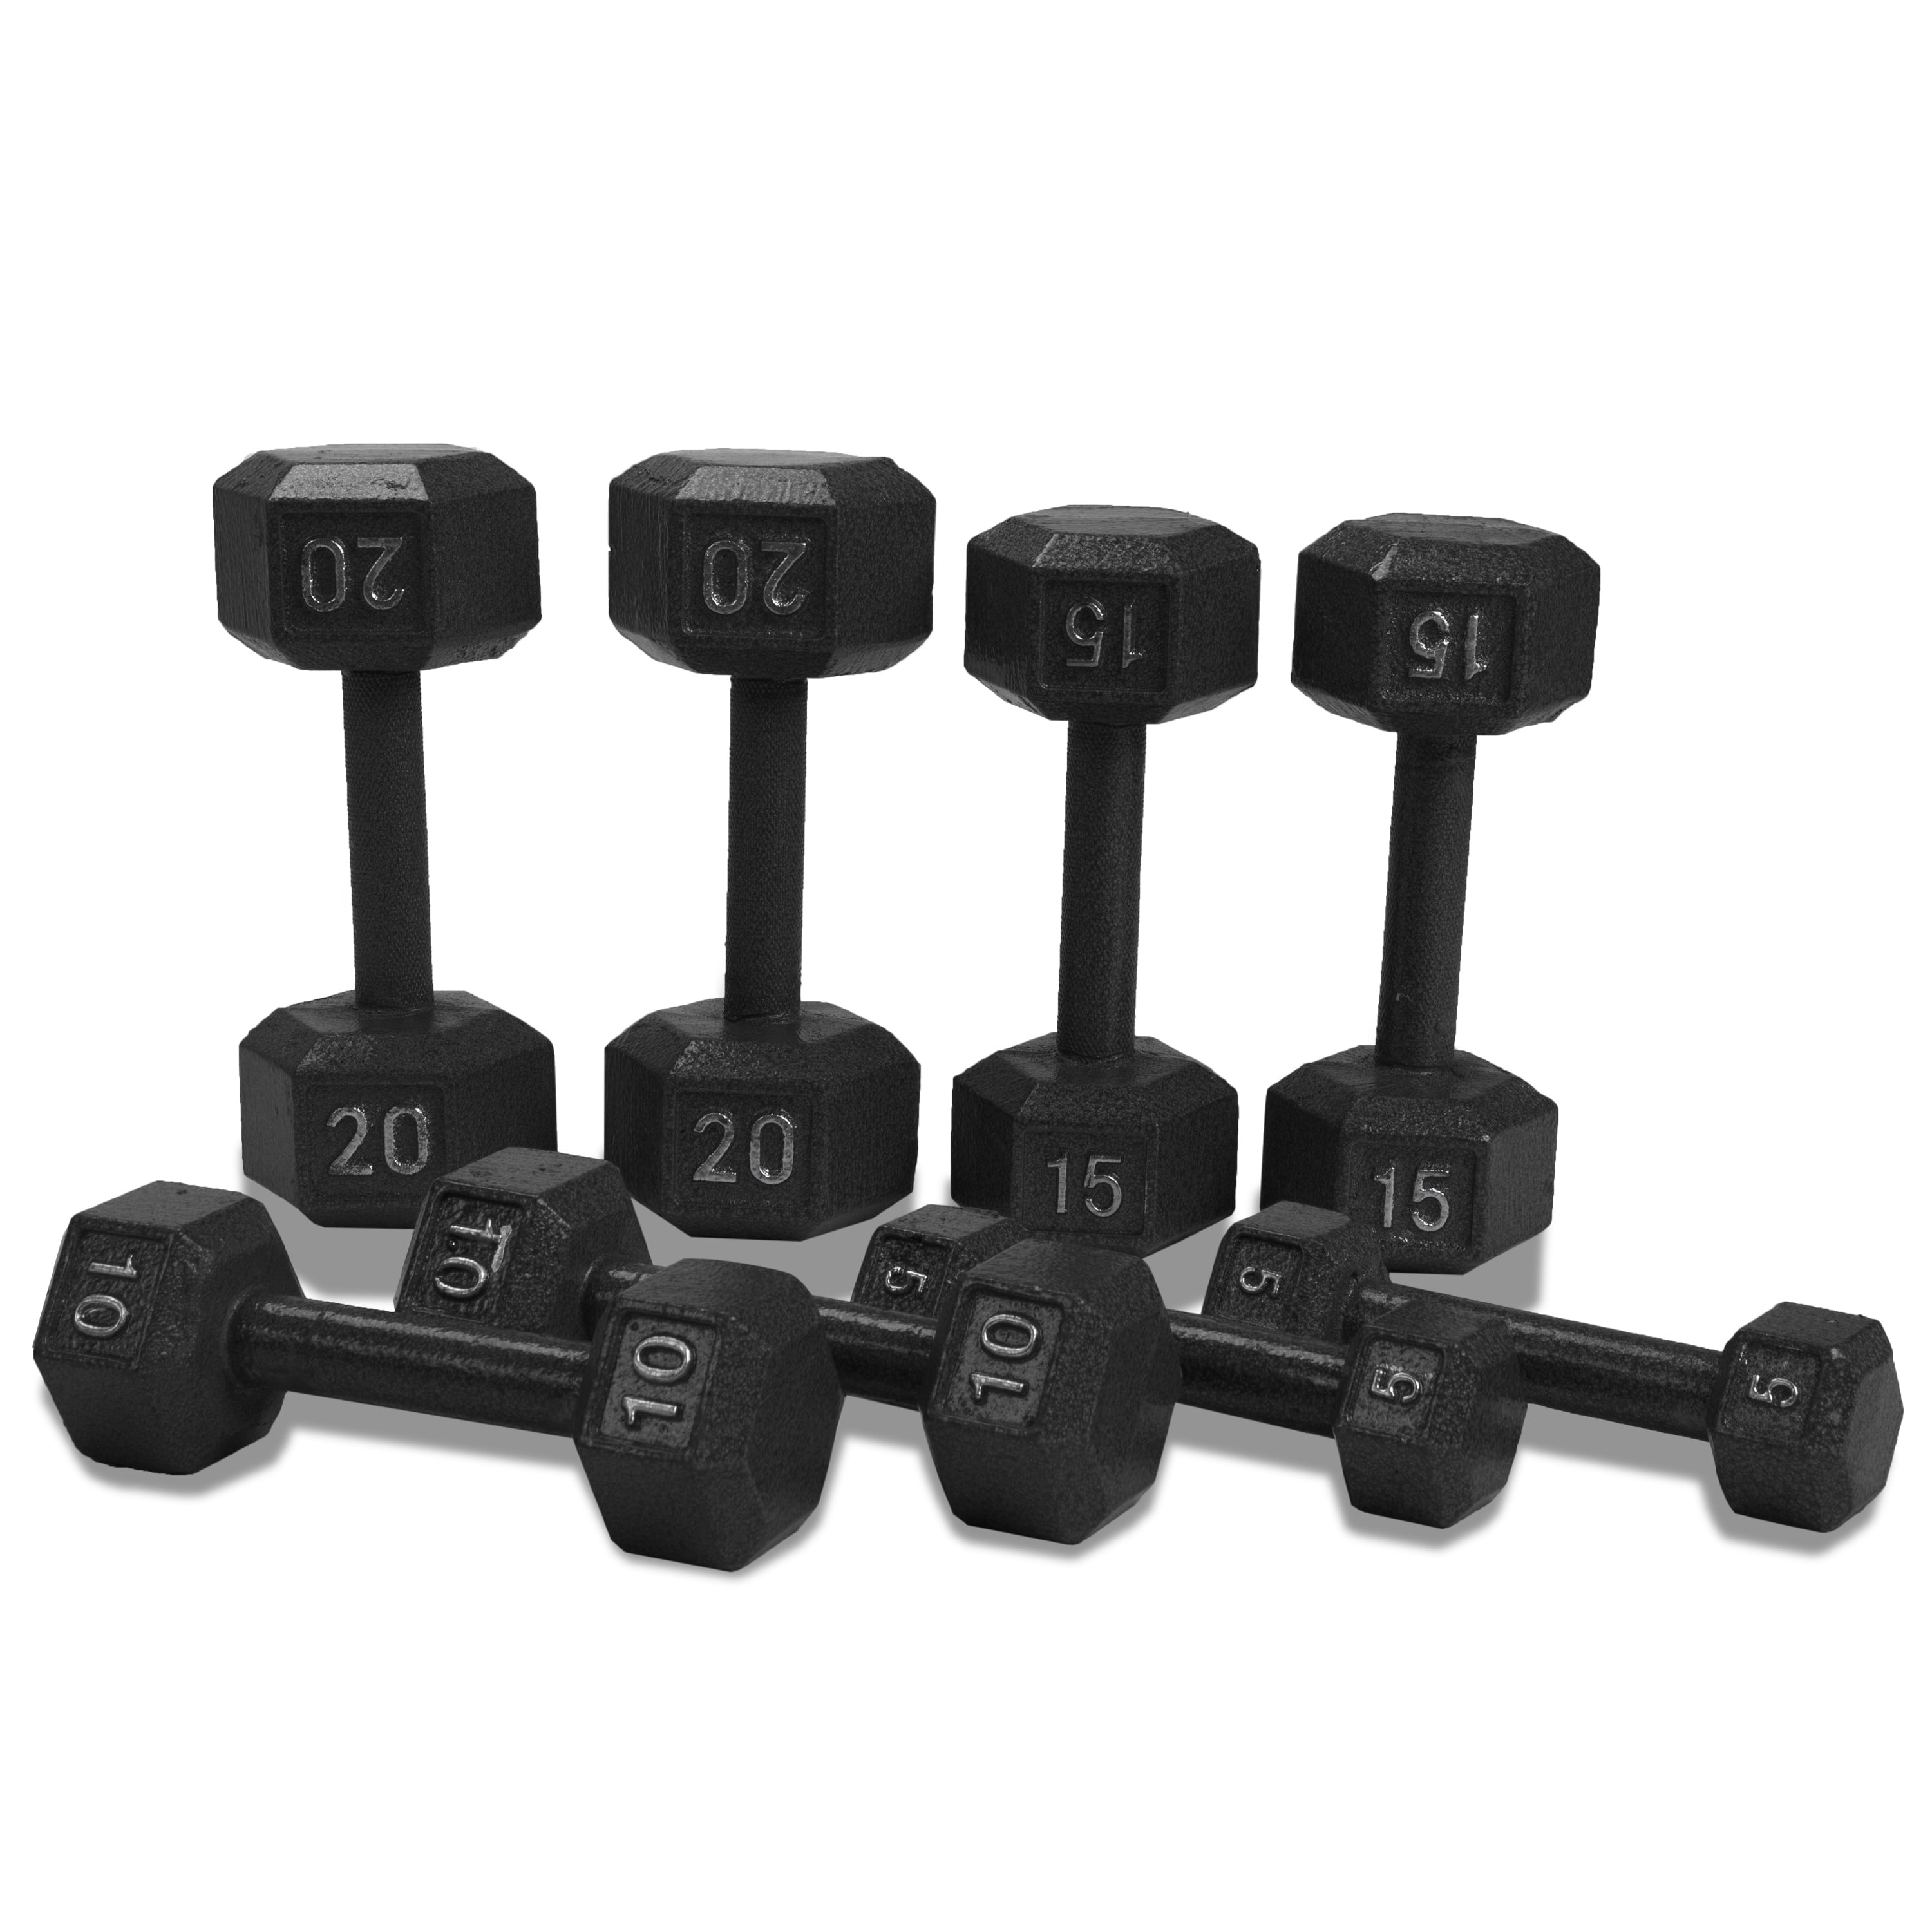 Cap Barbell 100 lb Cast Iron Hex Dumbbell Weight Set with Rack, Black ...